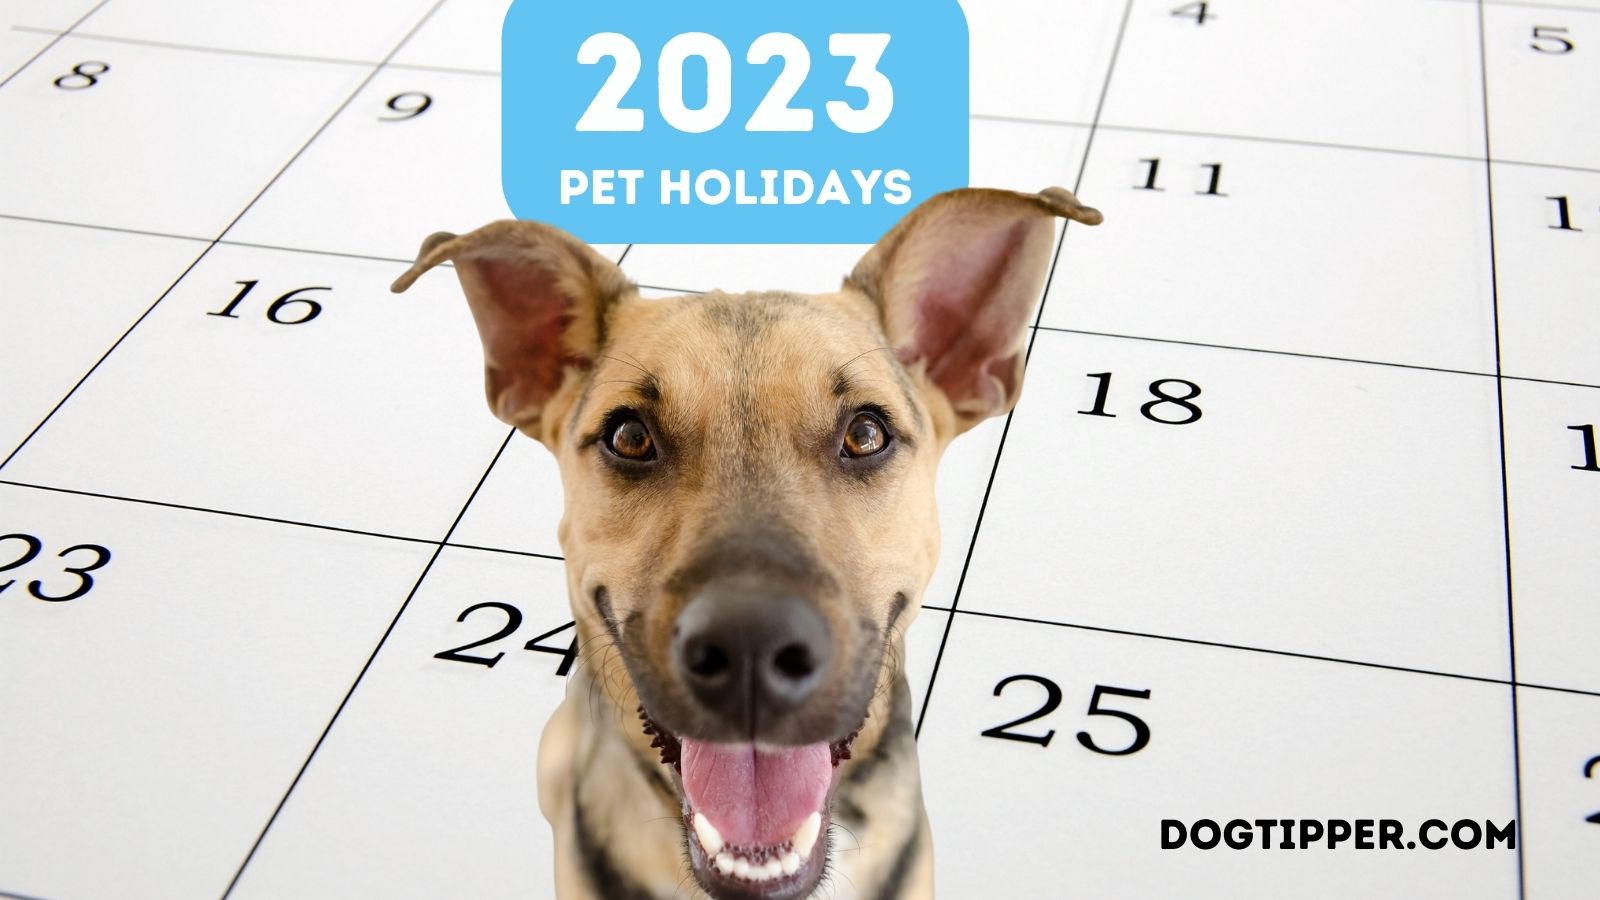 2023 Pet Holidays! 175+ Days, Weeks & Months For Dogs & Cats